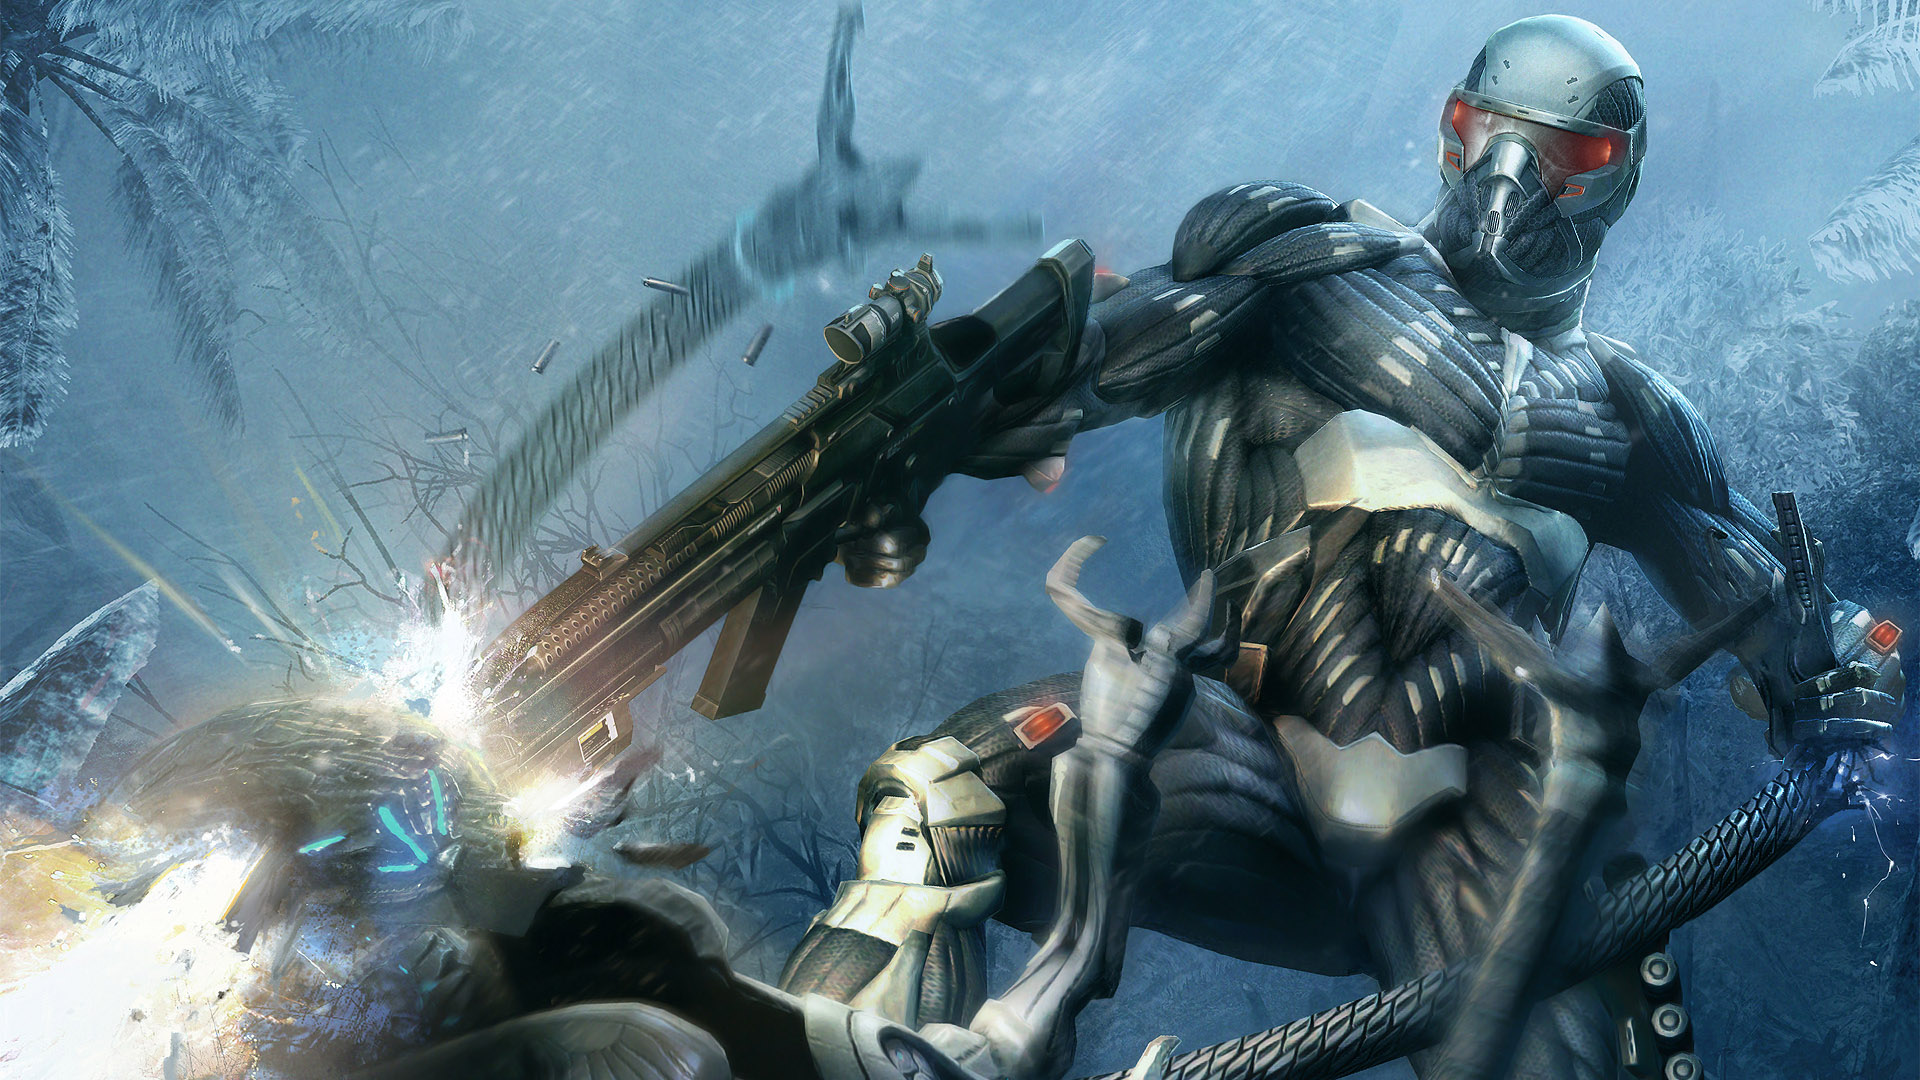 General 1920x1080 video games Crysis 2 2011 (Year) video game art weapon